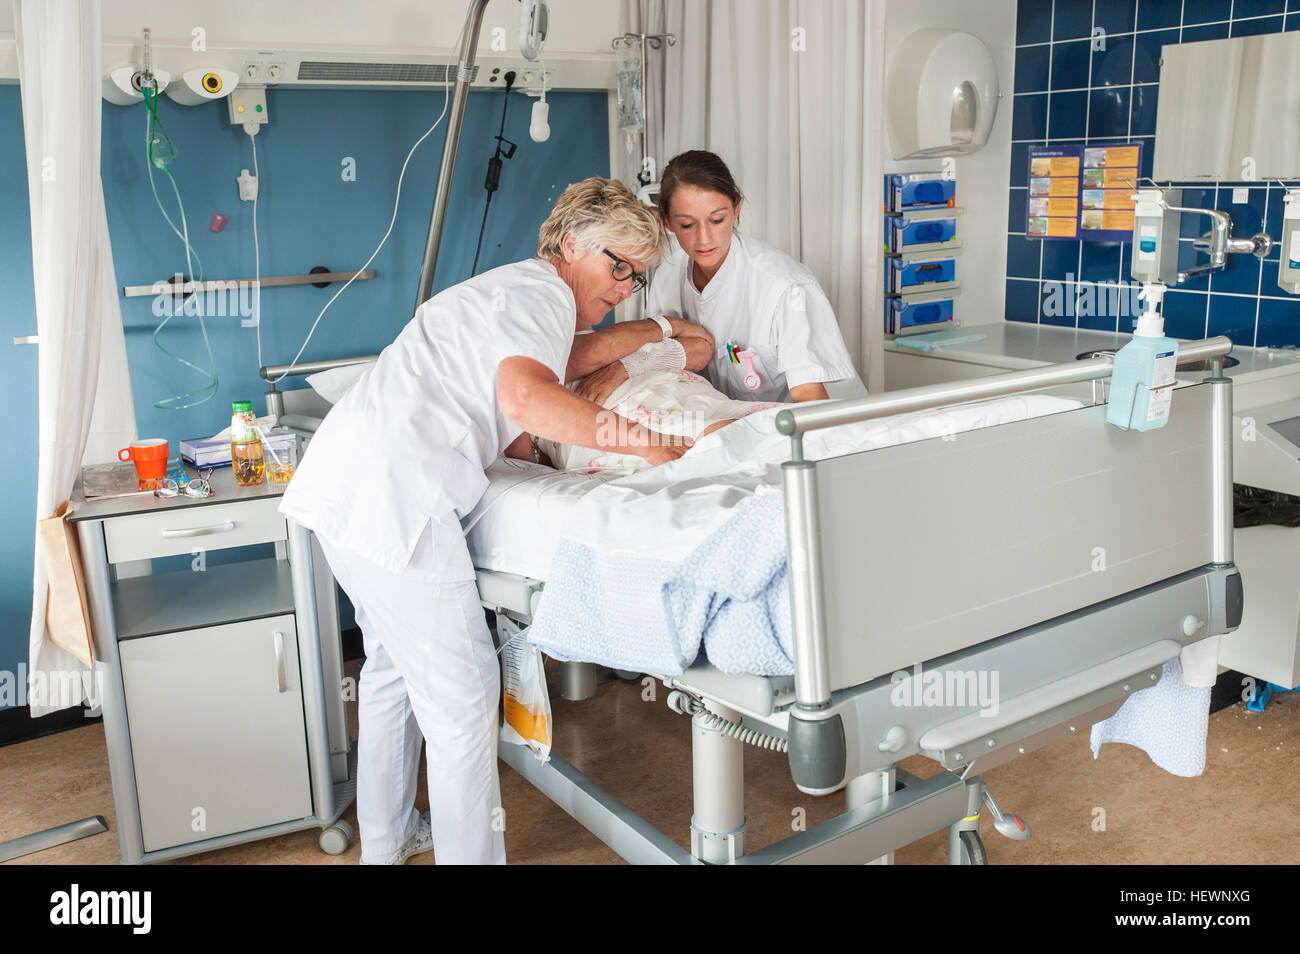 Nurses tending to patient in hospital bed Stock Photo